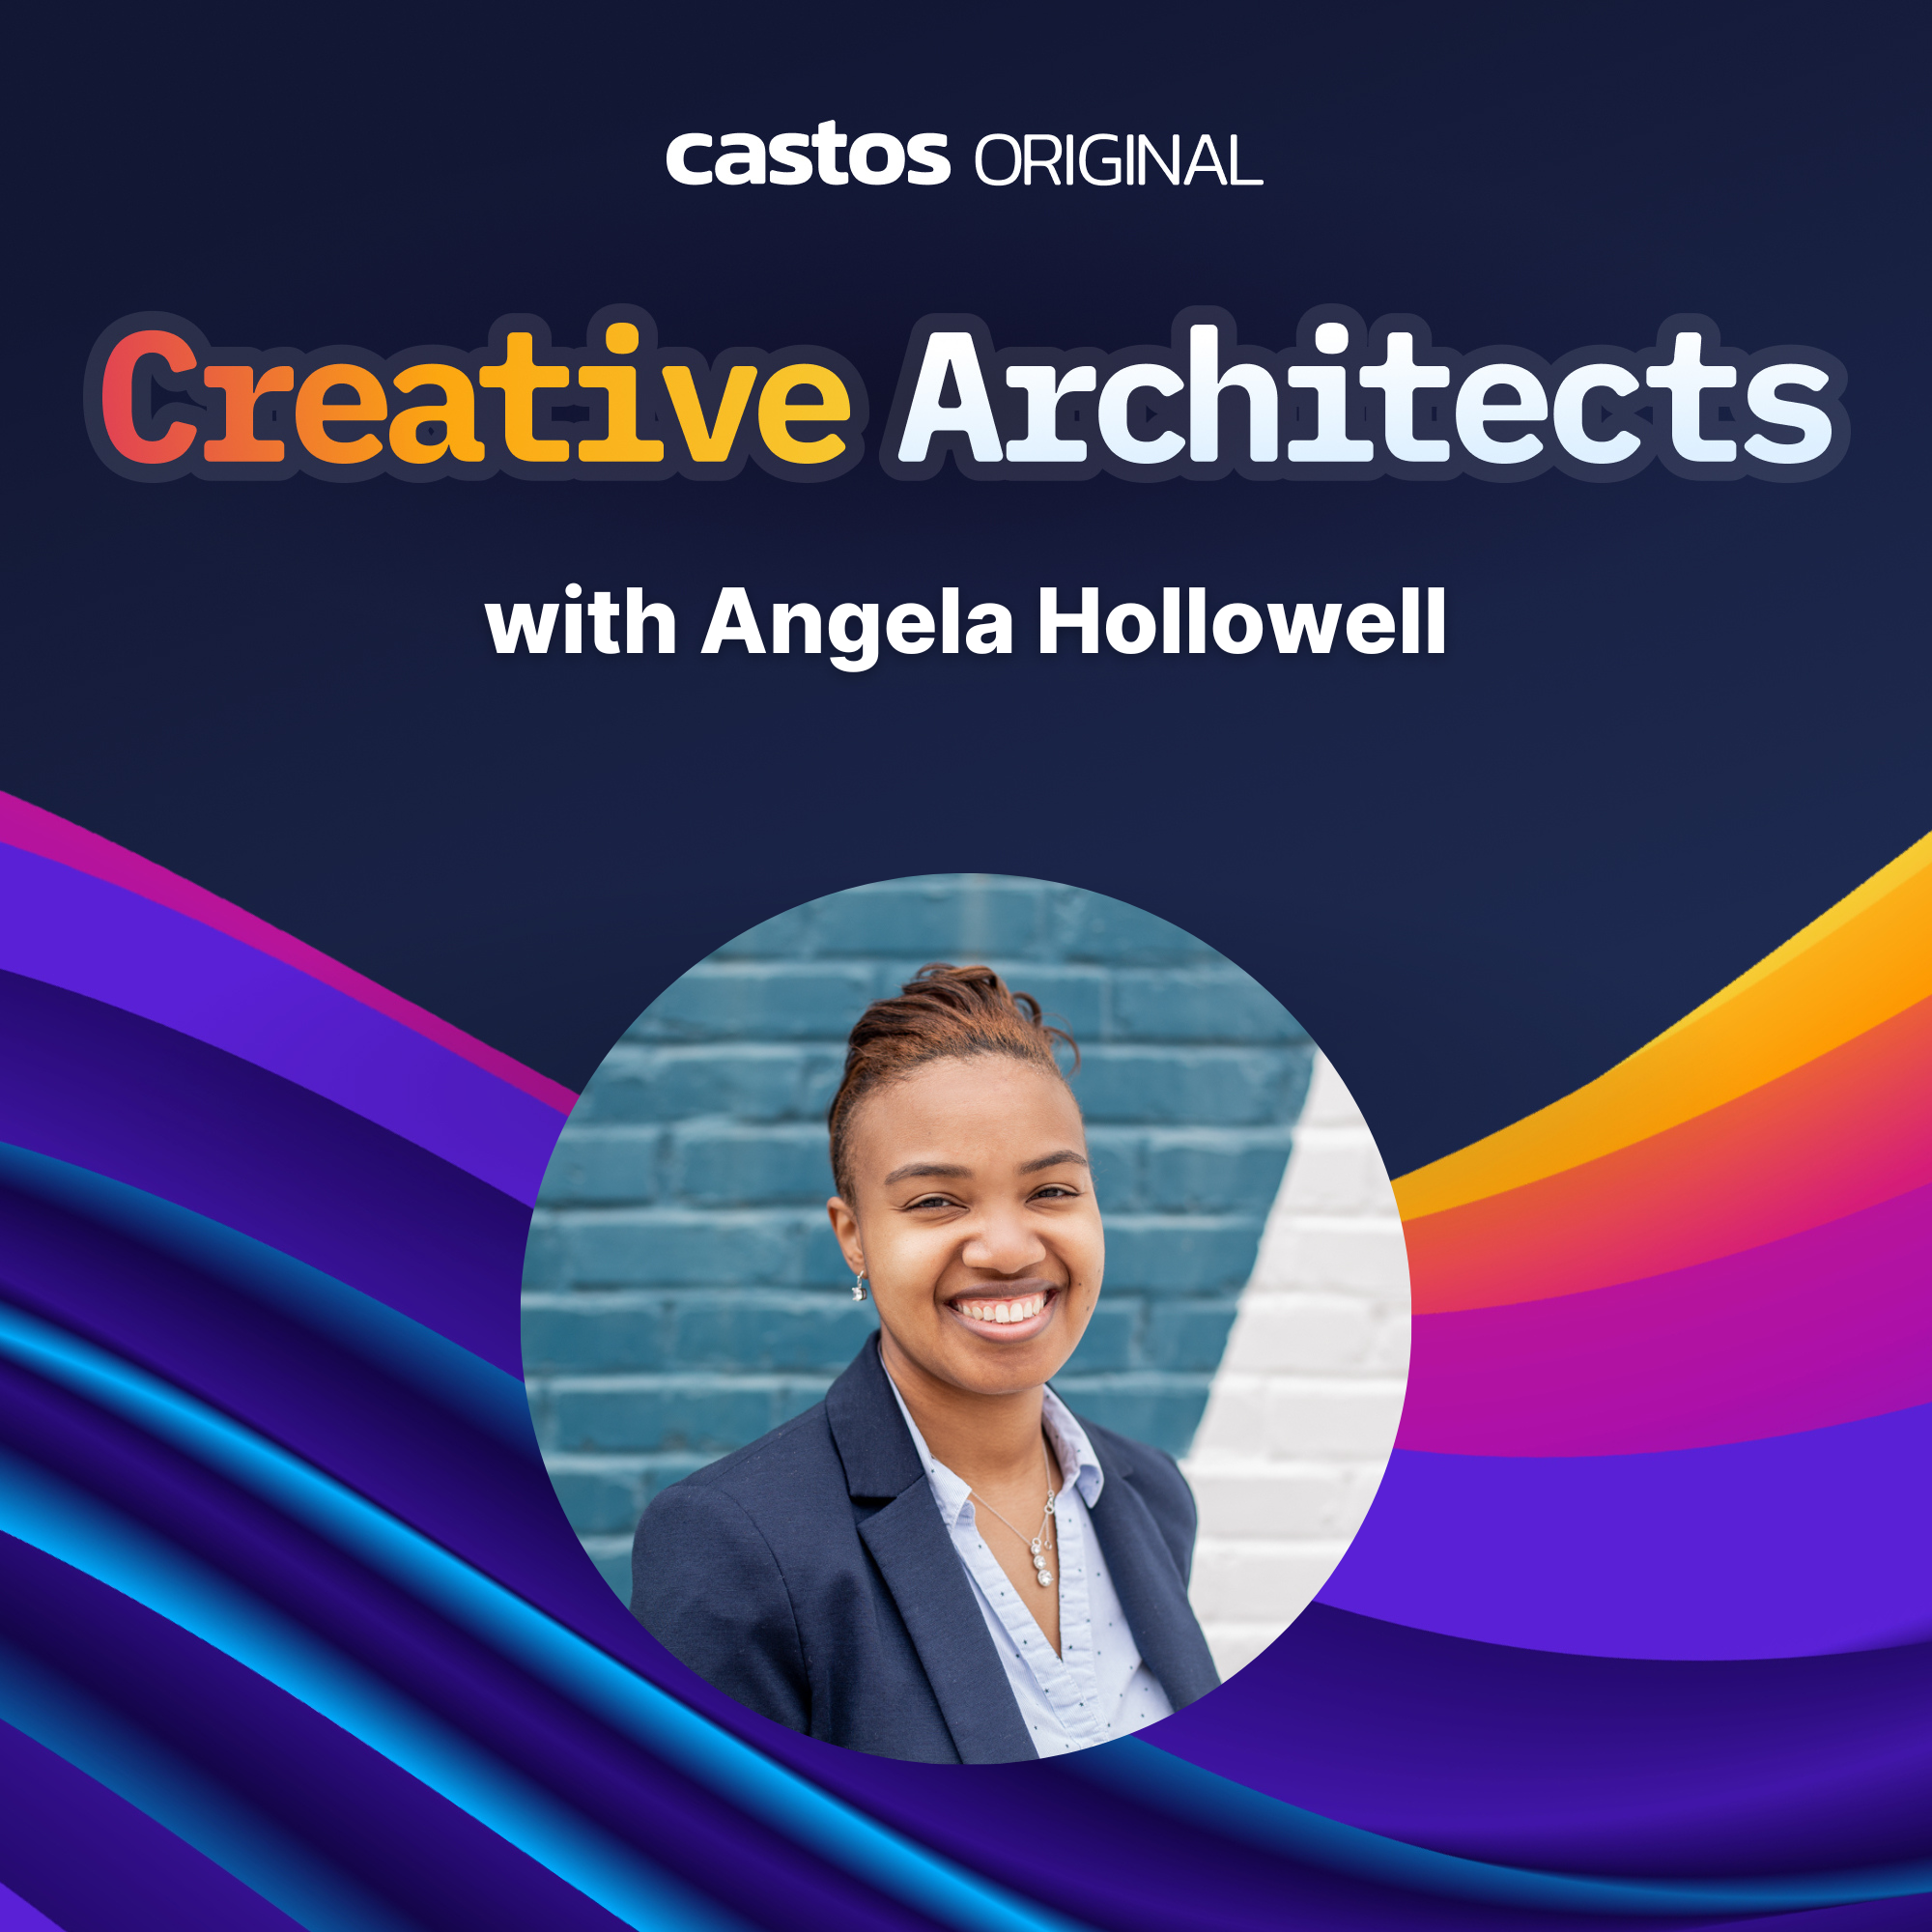 Introducing Creative Architects by Castos